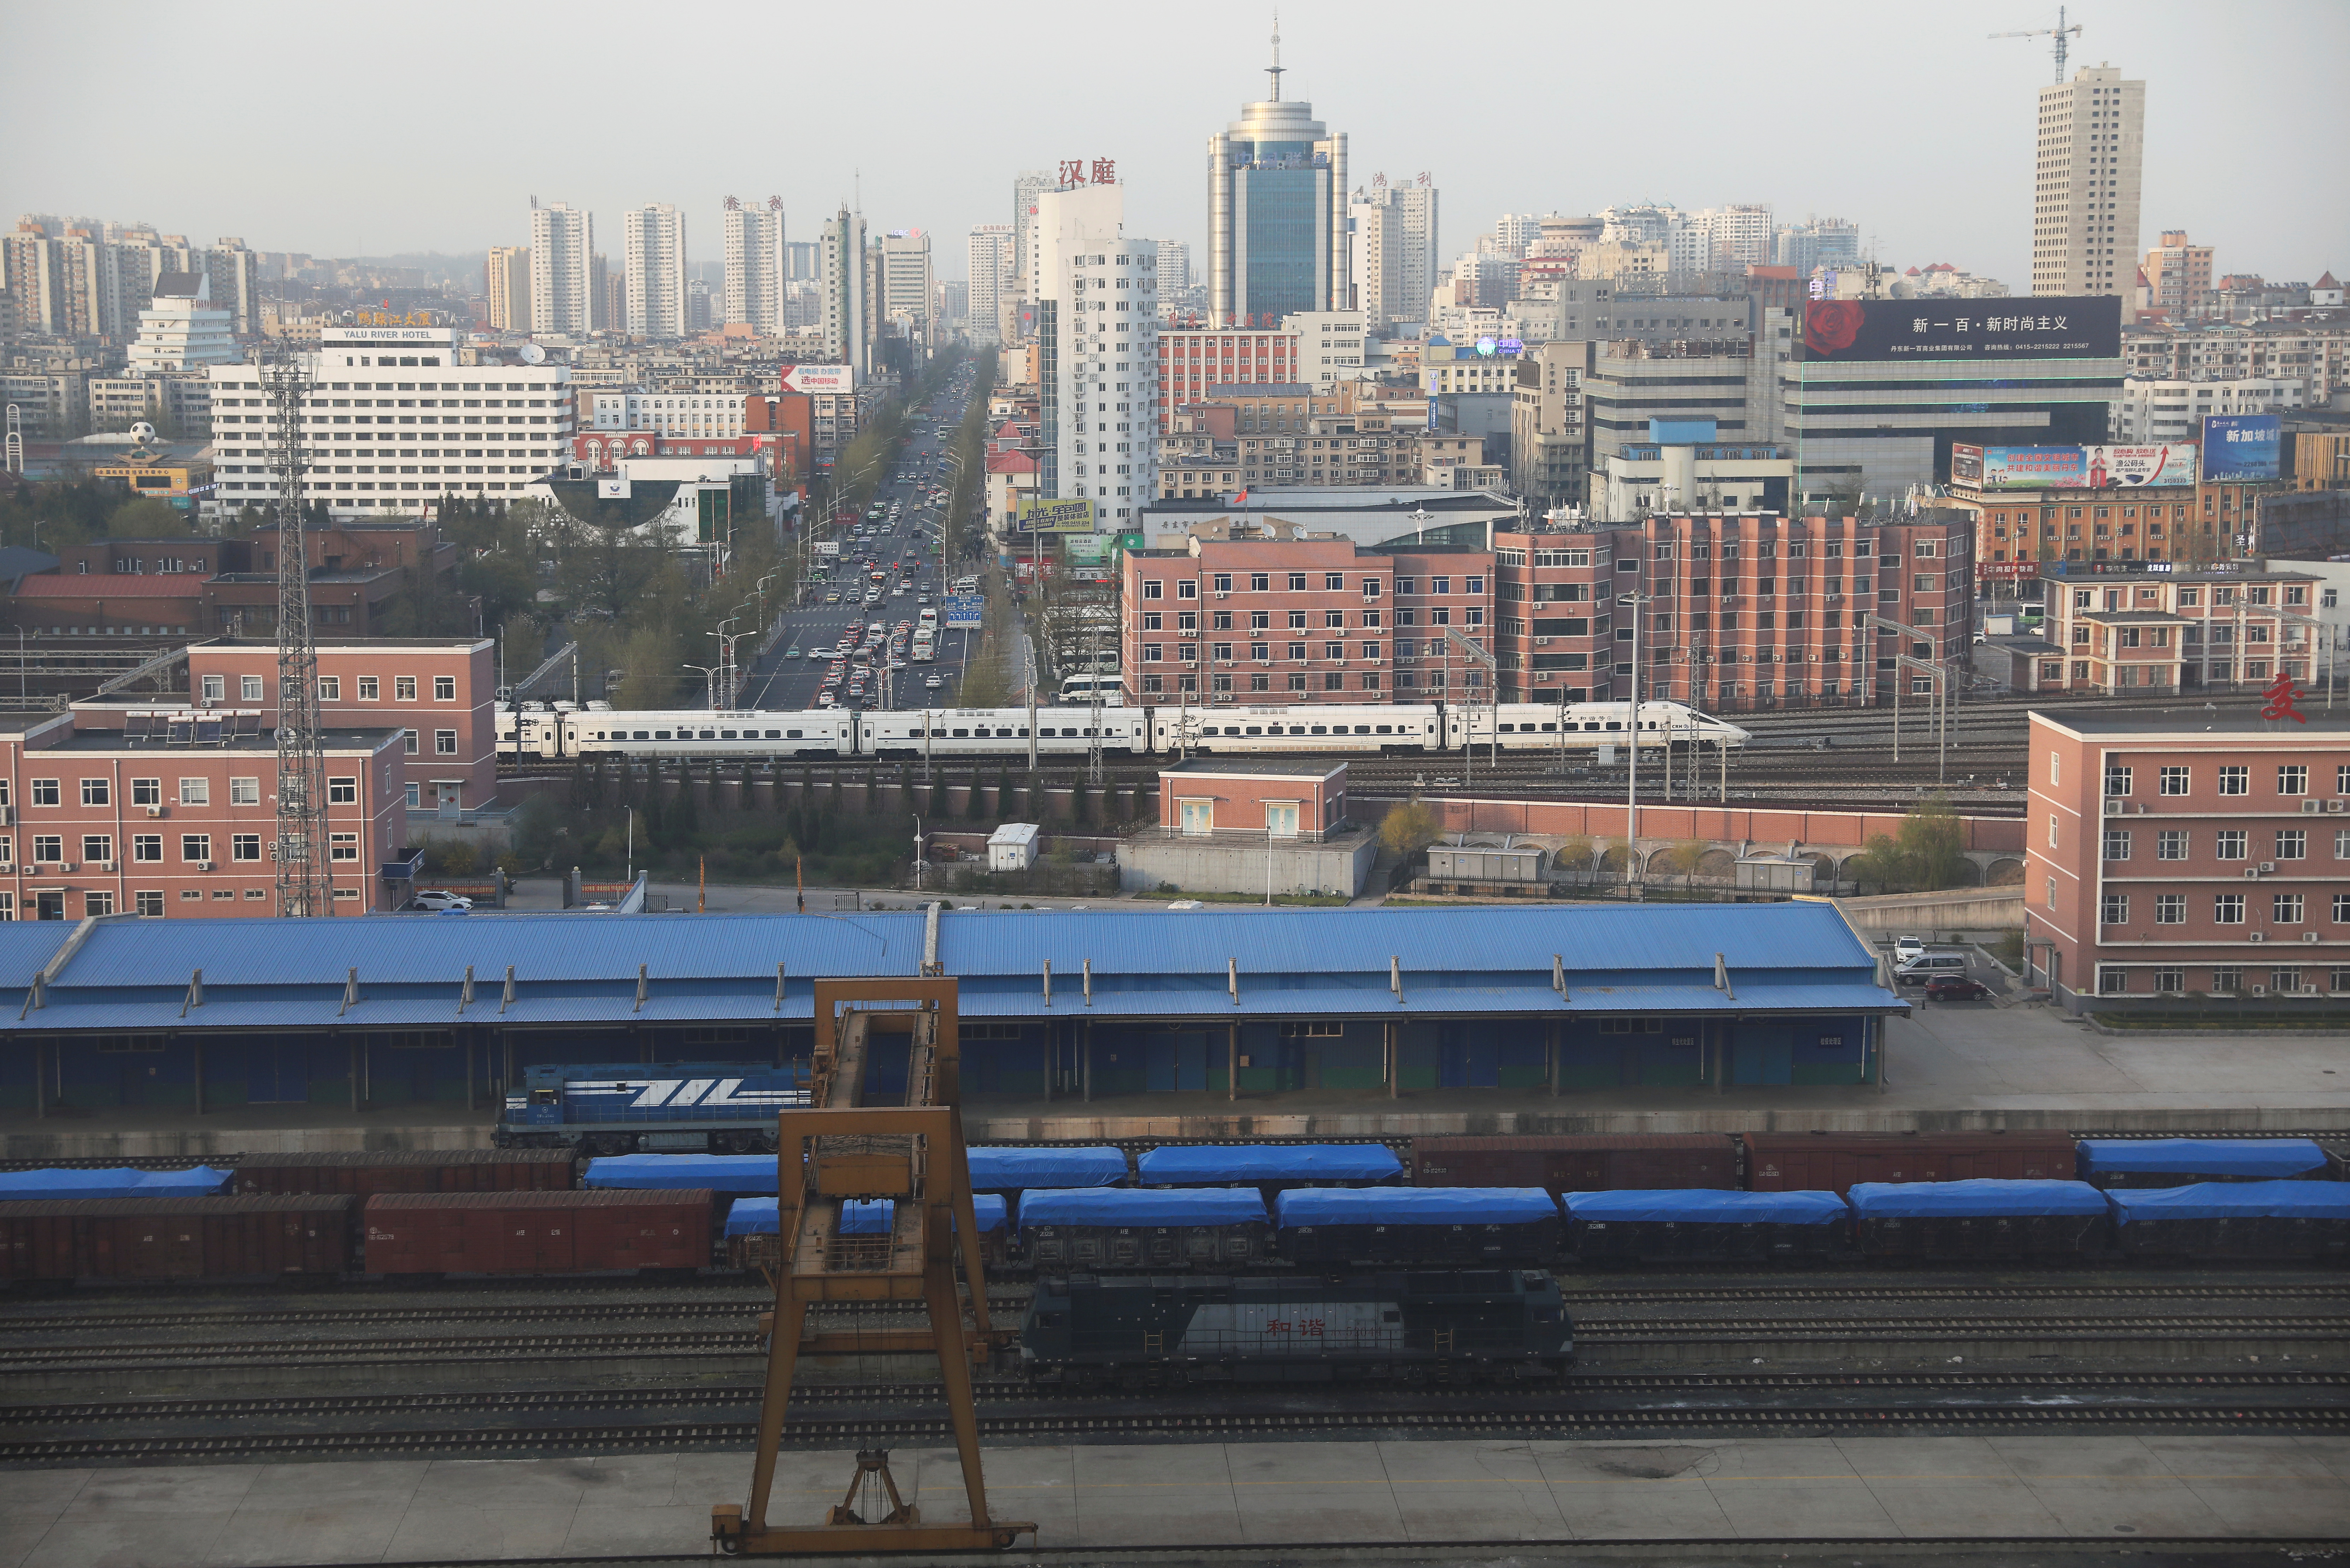 Freight cars are seen at a train station in Dandong